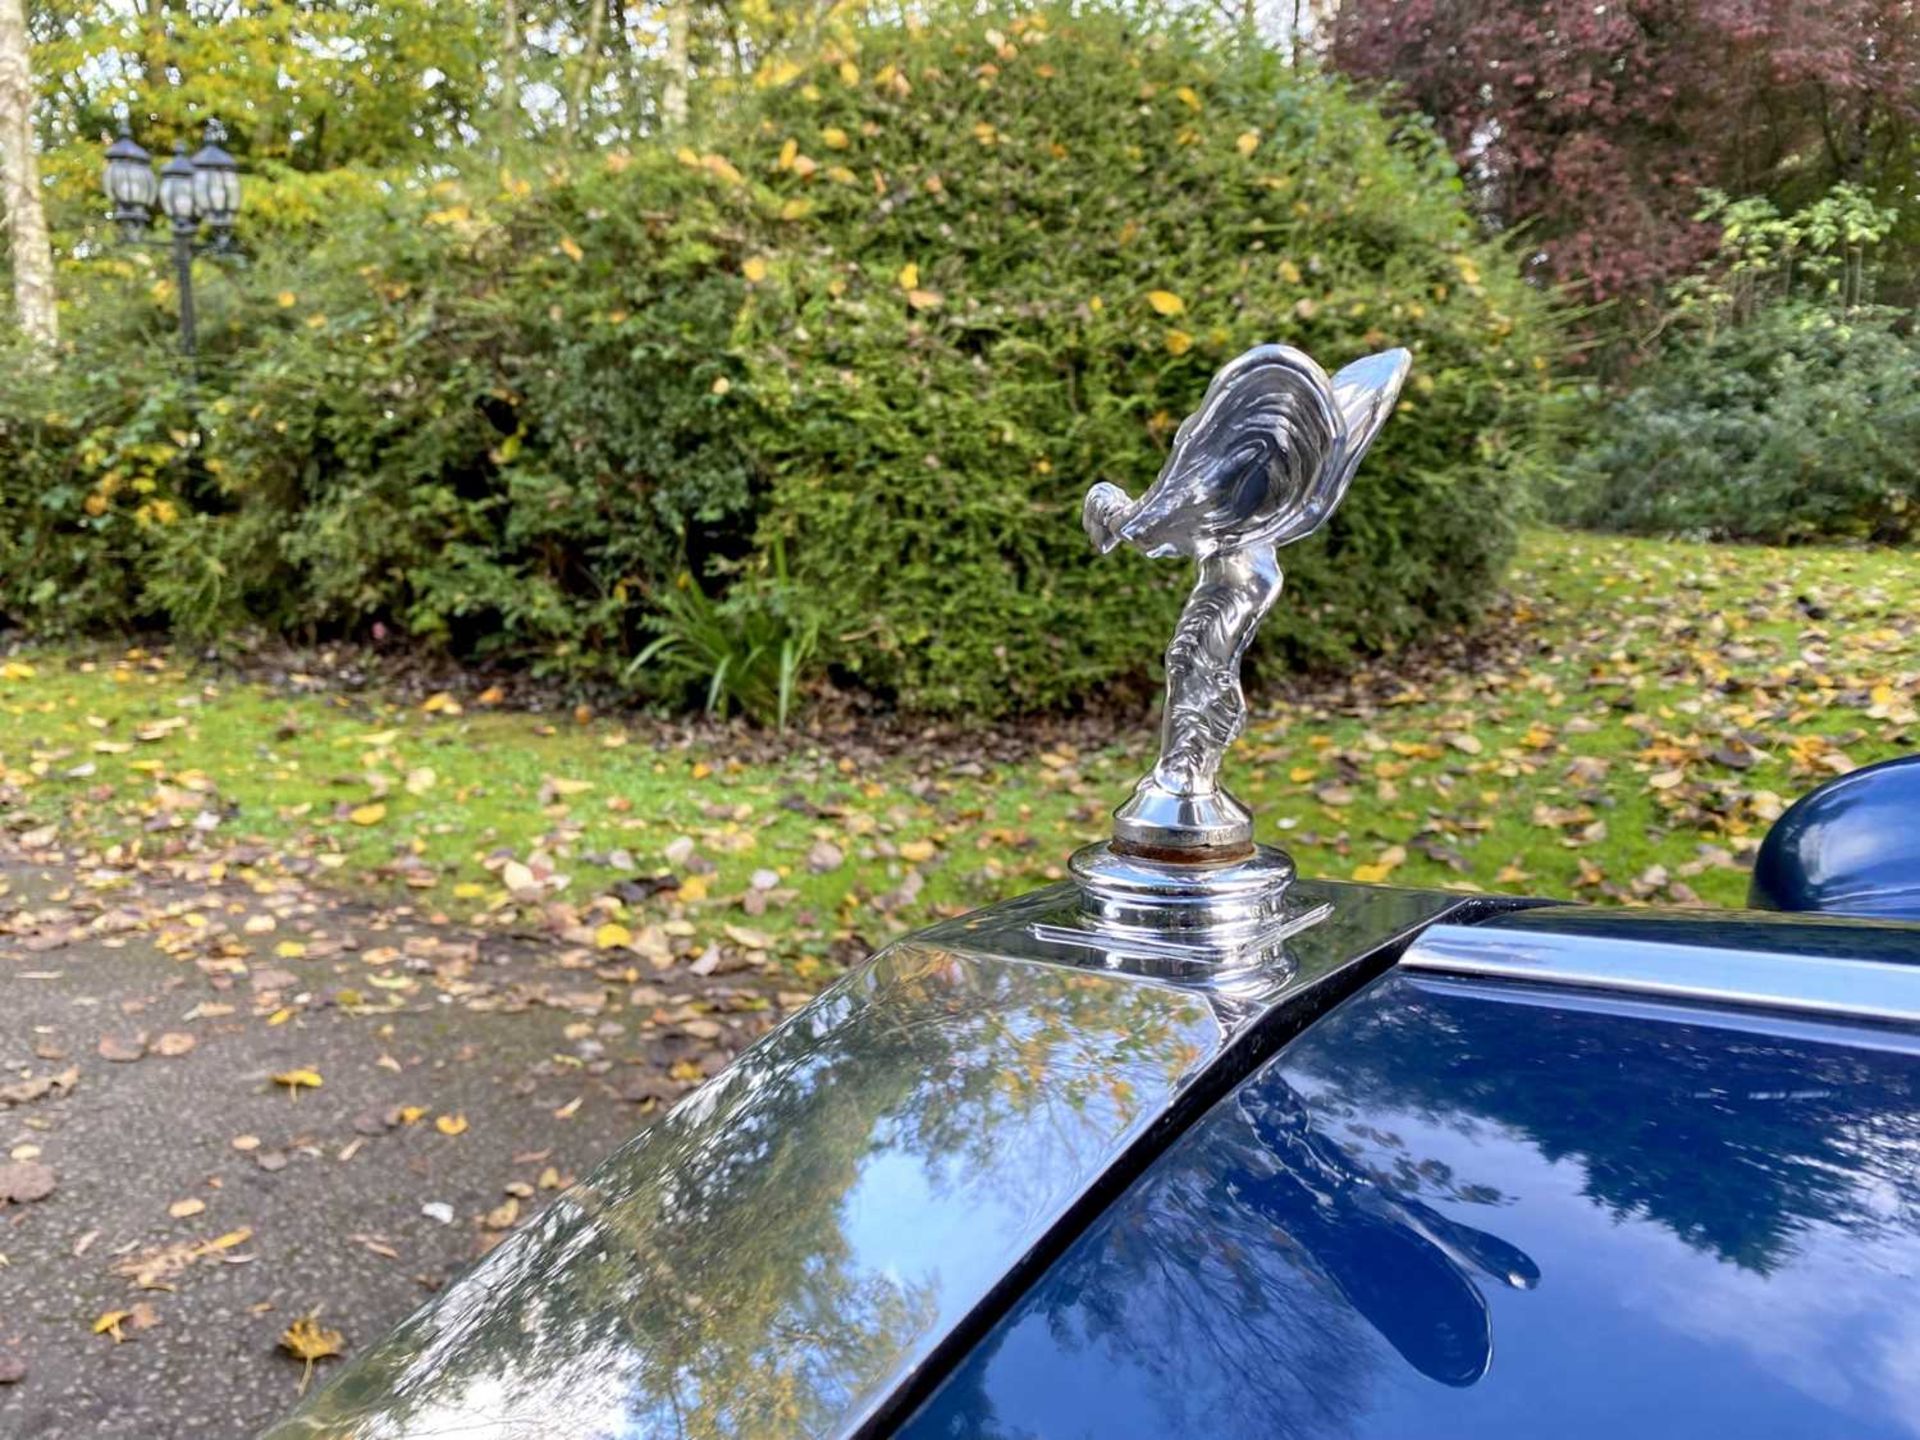 1971 Rolls-Royce Corniche Saloon Finished in Royal Navy Blue with Tobacco hide - Image 76 of 100